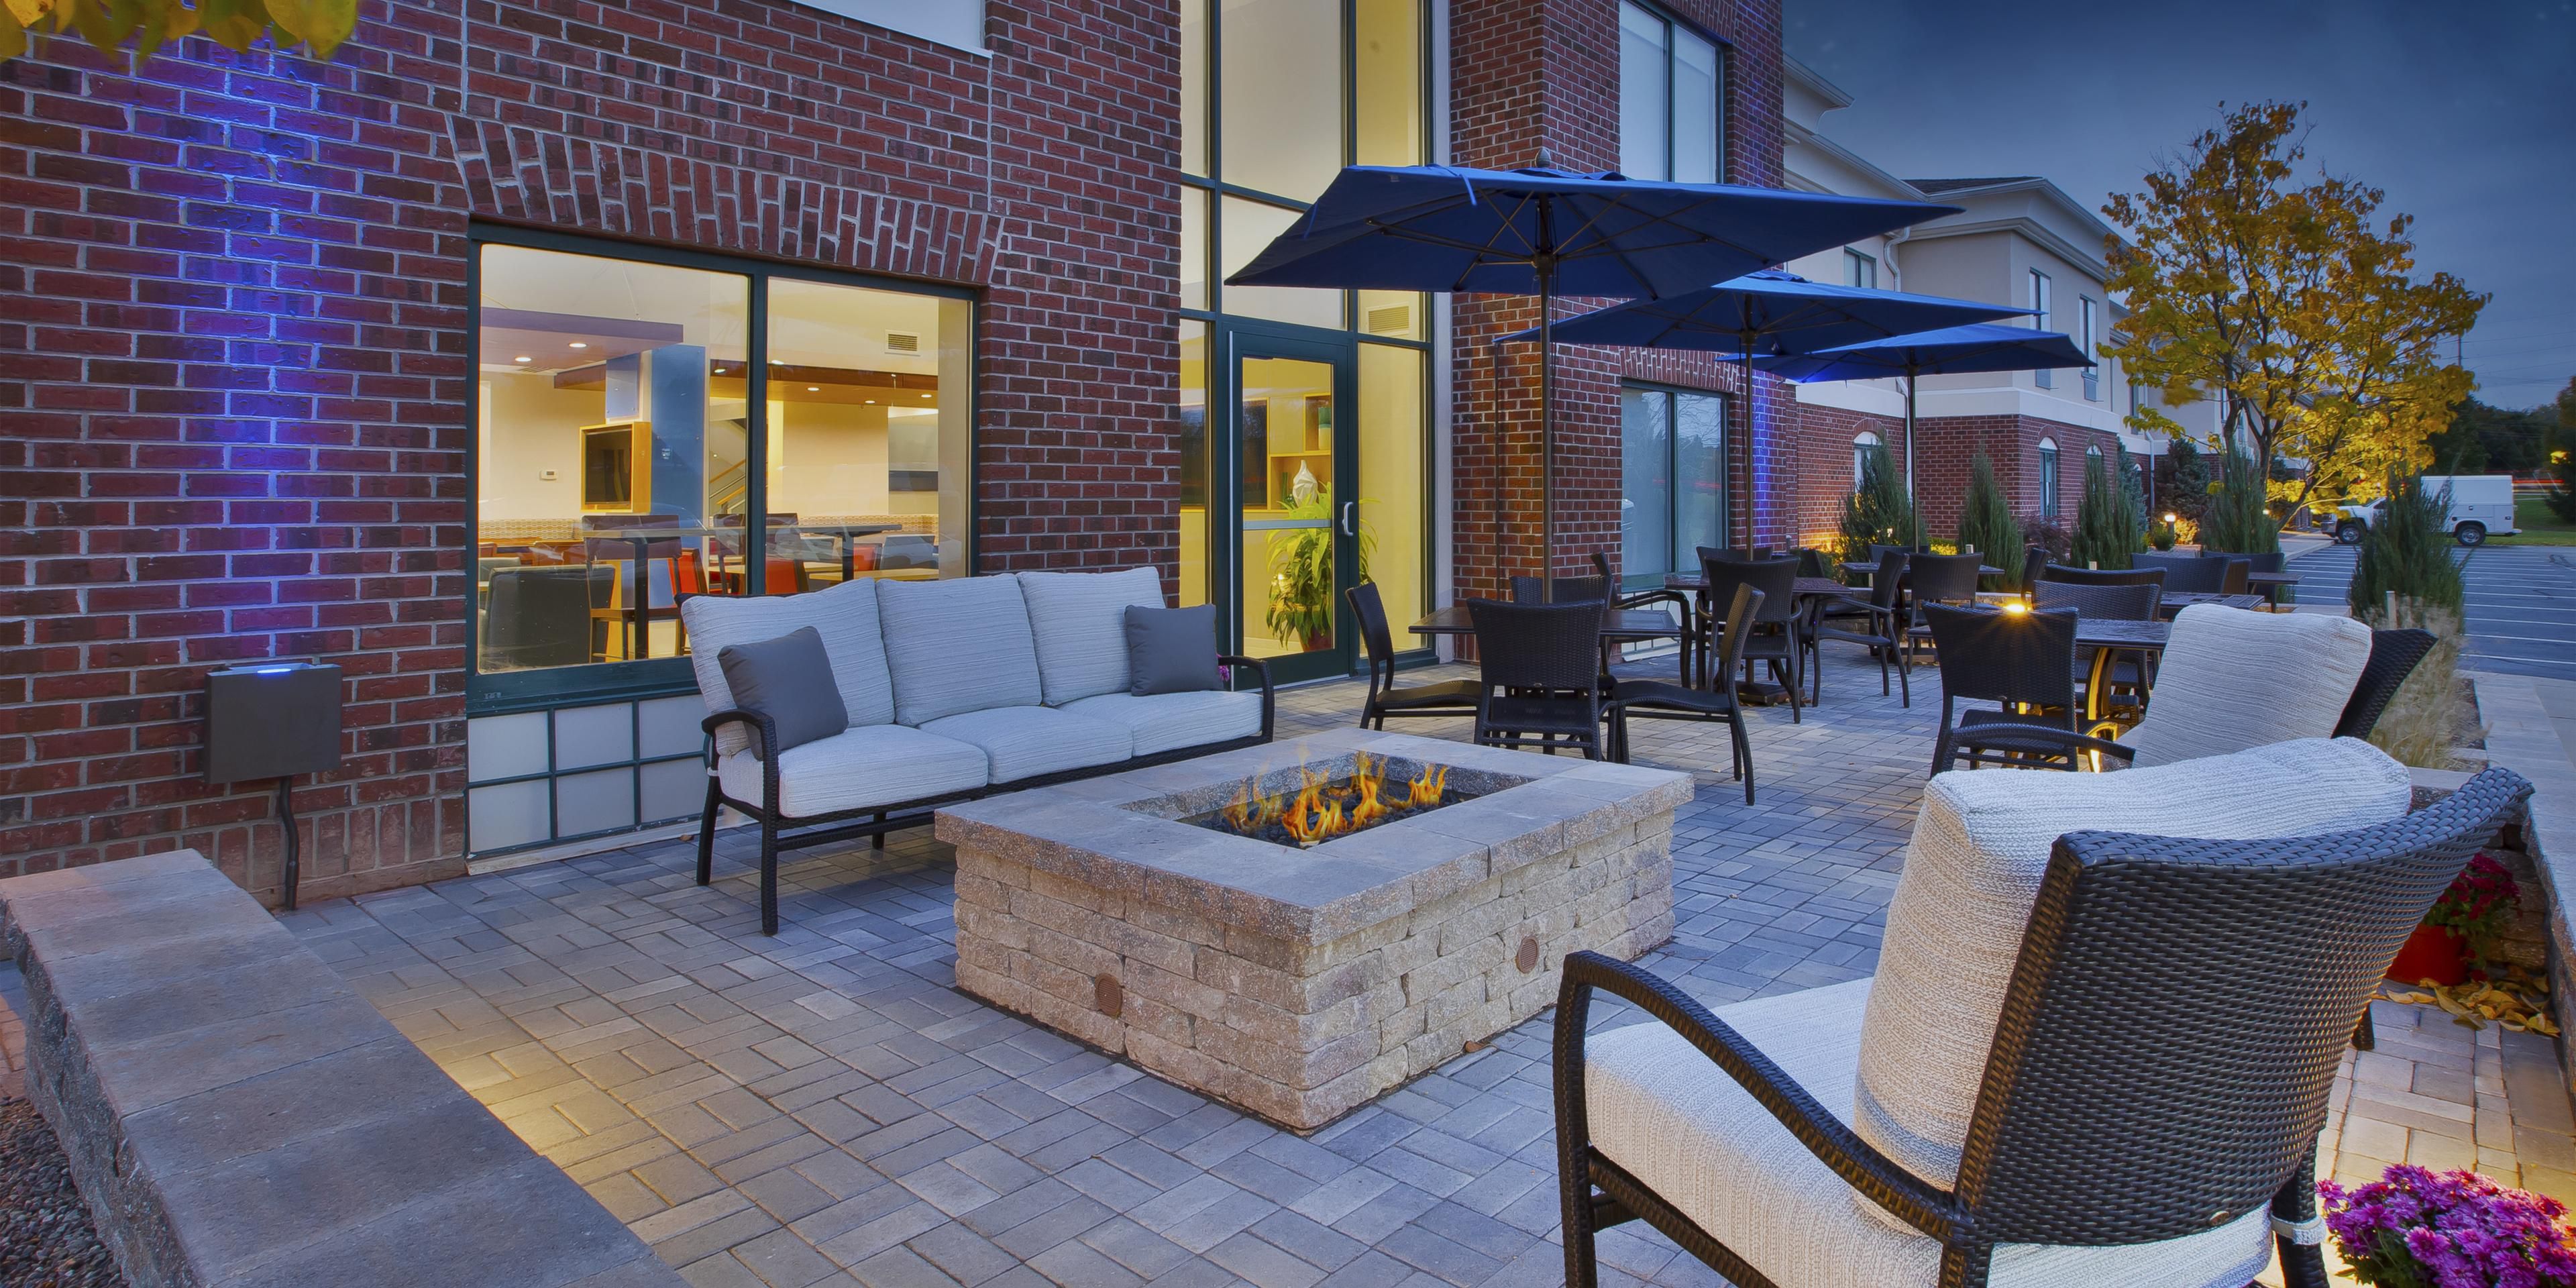 Relax on our beautiful outdoor patio and shake off the stress of the day or enjoy quiet conversation with friends.